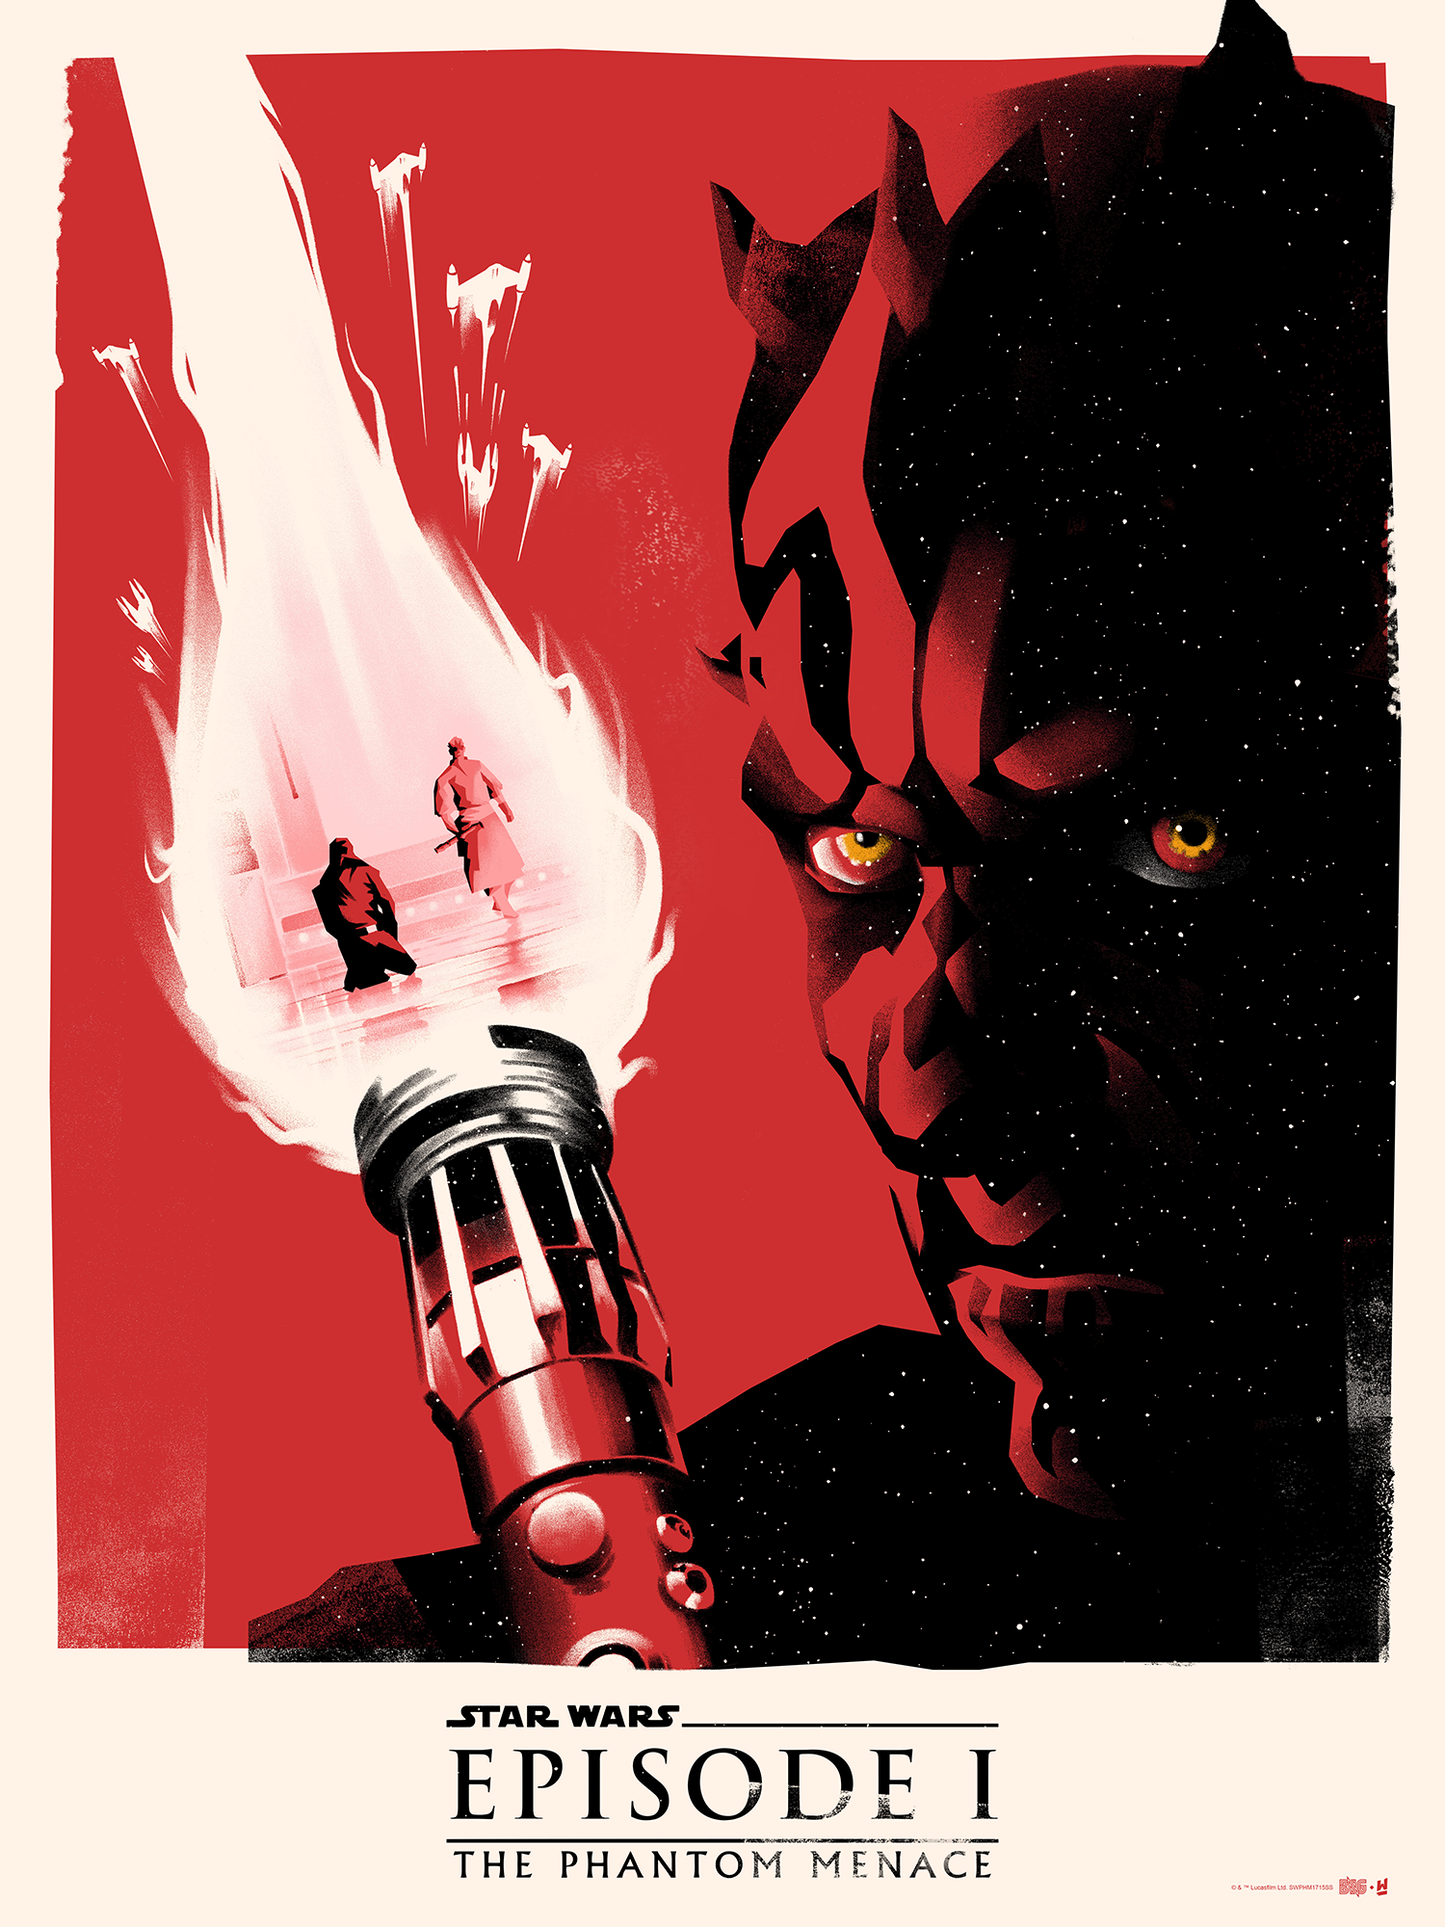 Lyndon Willoughby "Sinister Sith"